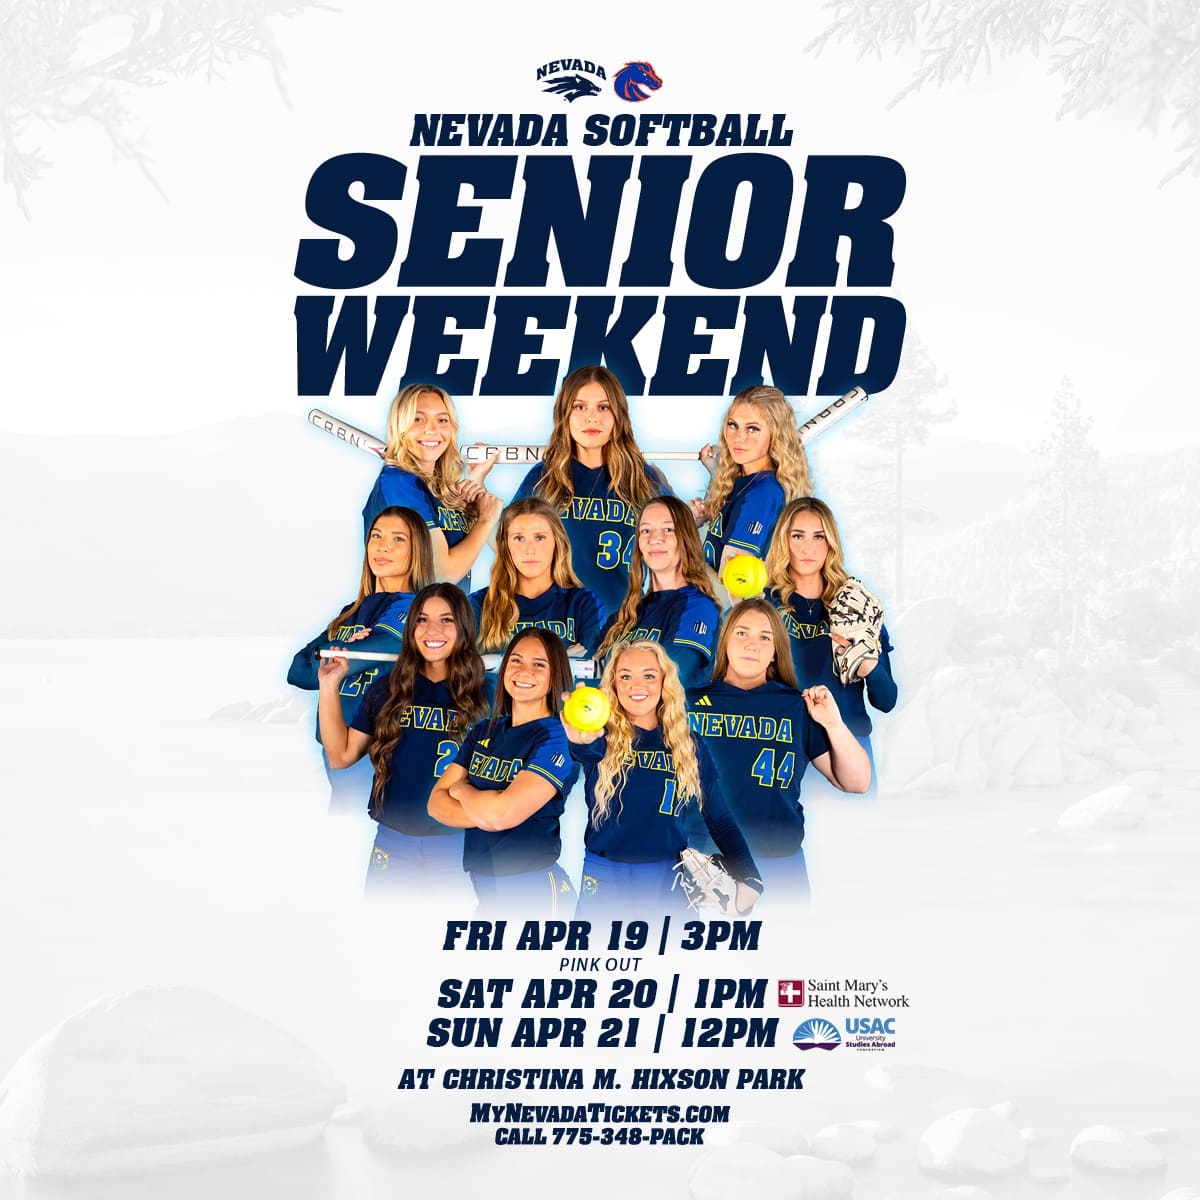 One last time for our seniors💙 Come join us at Hixson this Saturday and Sunday as we celebrate senior weekend! Buy your tickets NOW 🎟️ bit.ly/4bUUAja #BattleBorn